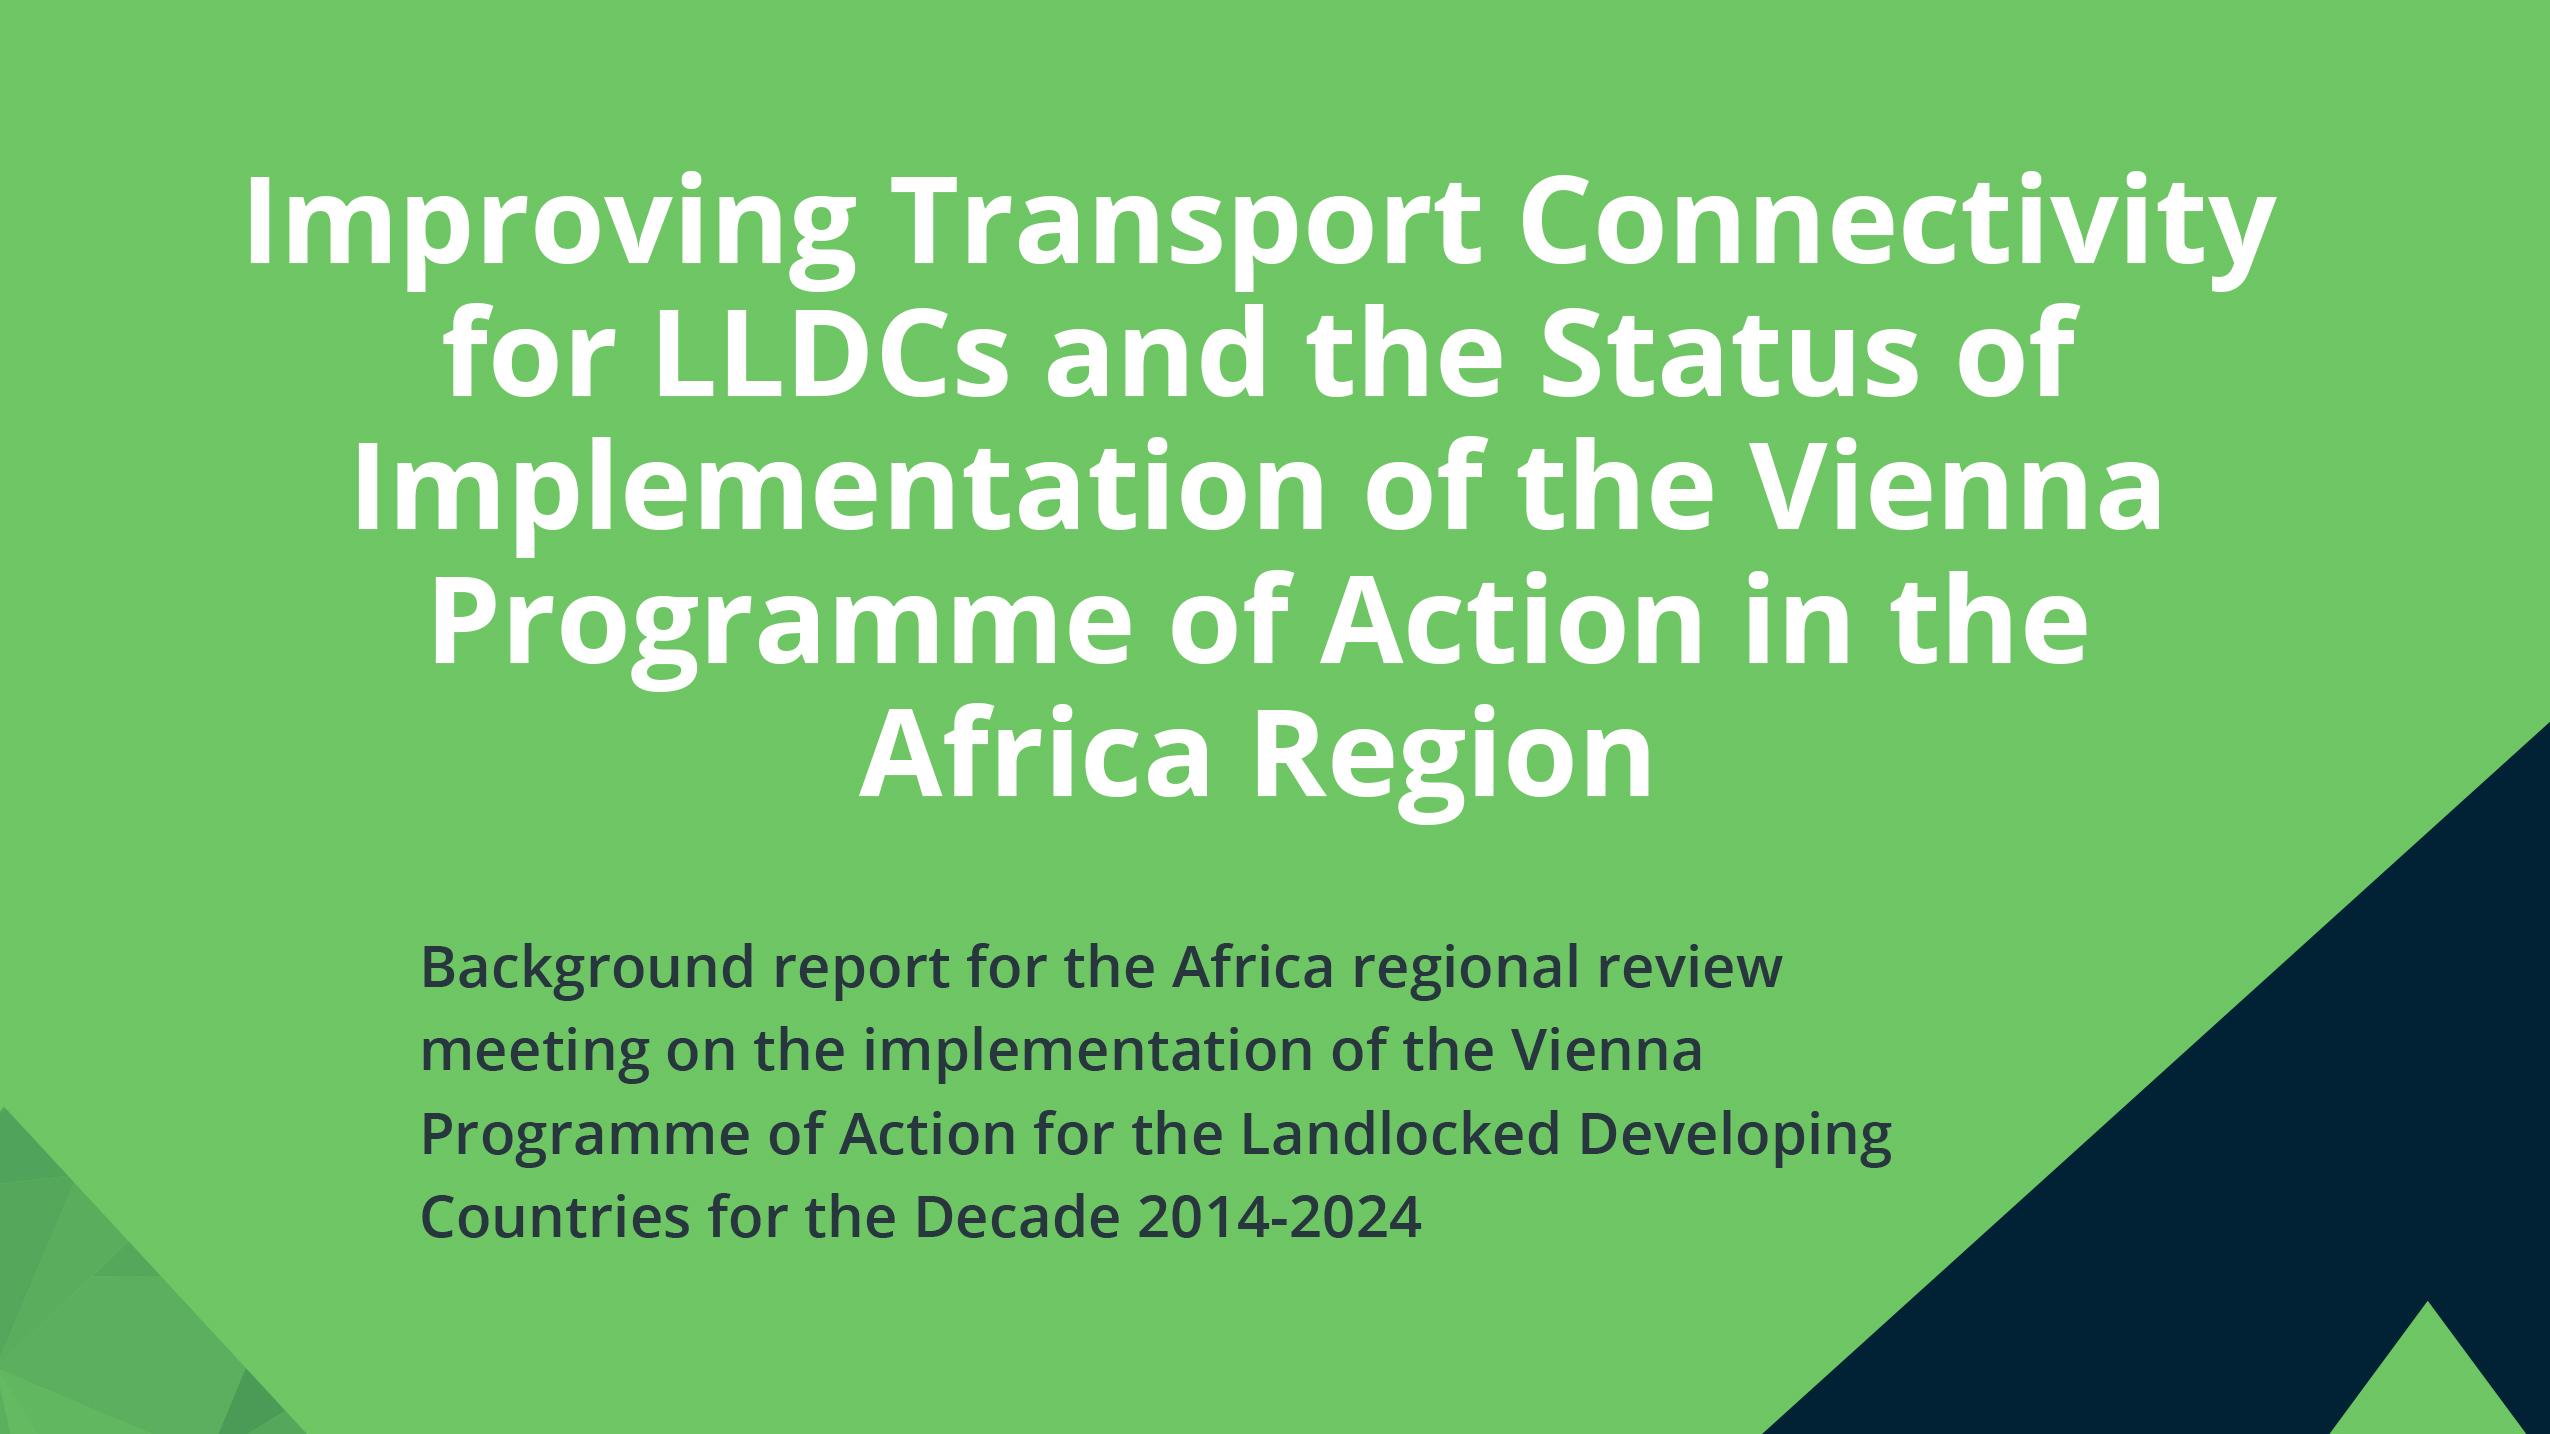 Improving Transport Connectivity for LLDCs and the Status of Implementation of the Vienna Programme of Action in the Africa Region